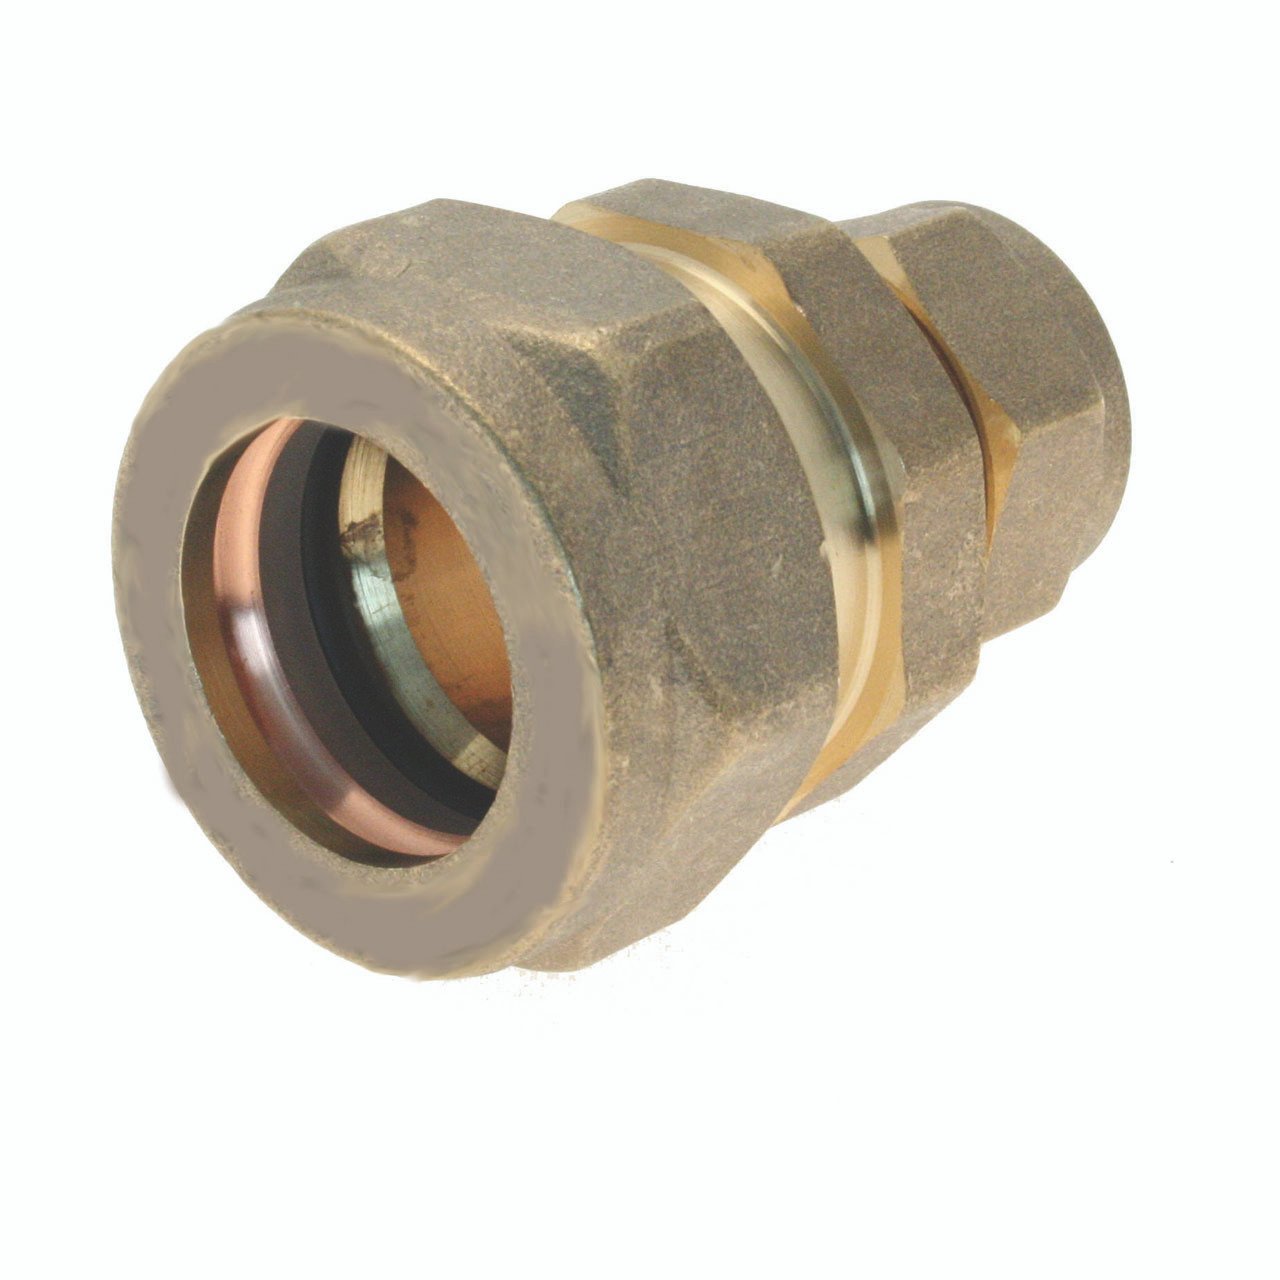 Photograph of ?" x 9lb Lead x 22mm Copper Adapter